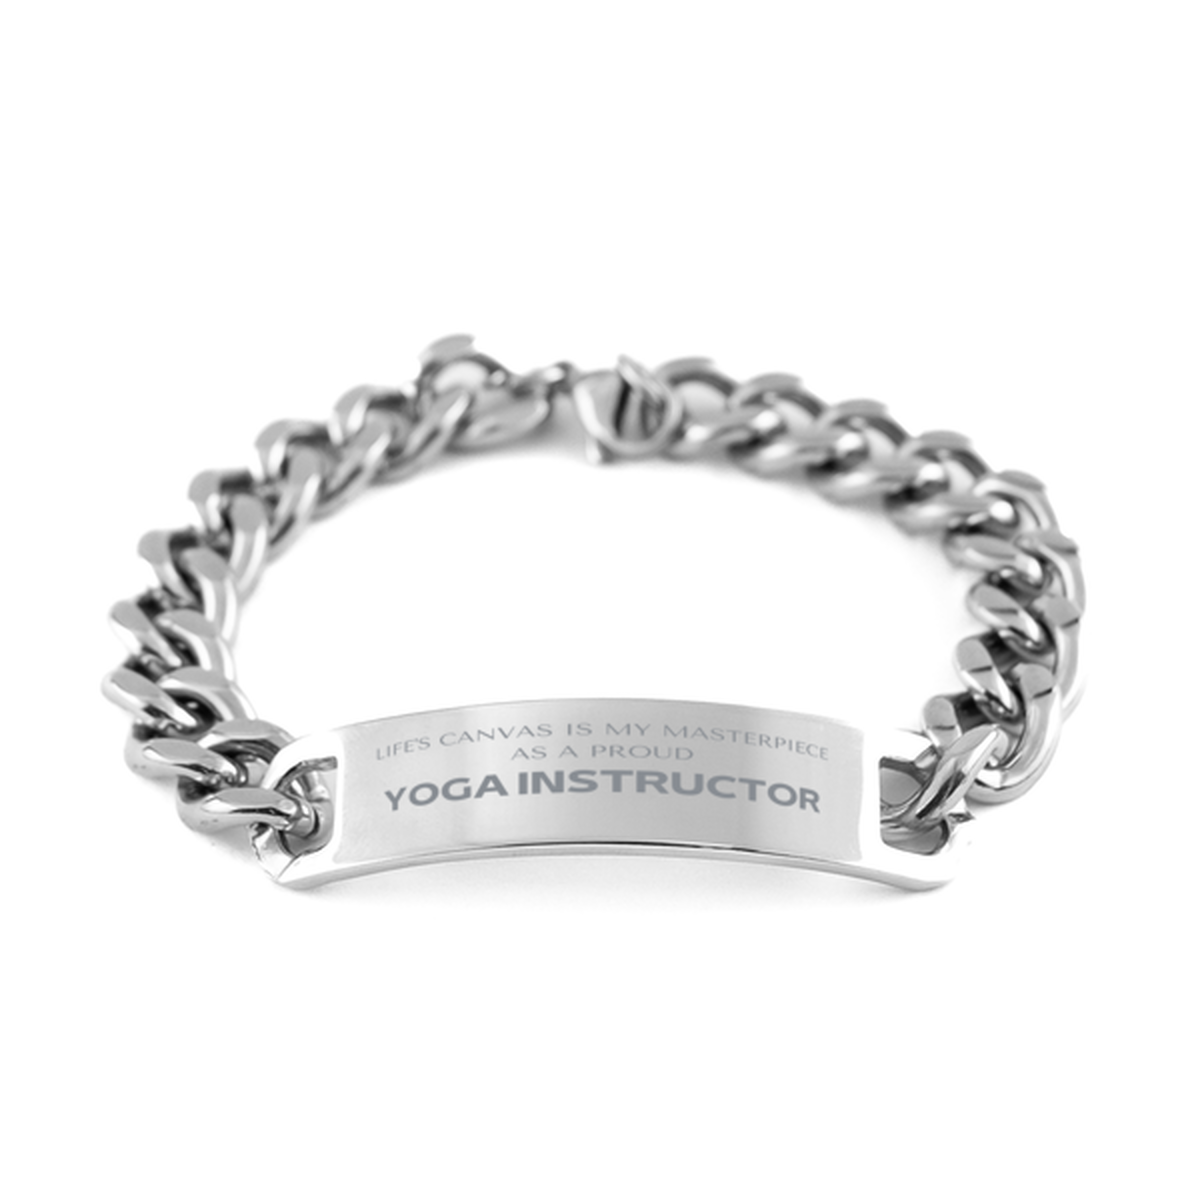 Proud Yoga Instructor Gifts, Life's canvas is my masterpiece, Epic Birthday Christmas Unique Cuban Chain Stainless Steel Bracelet For Yoga Instructor, Coworkers, Men, Women, Friends